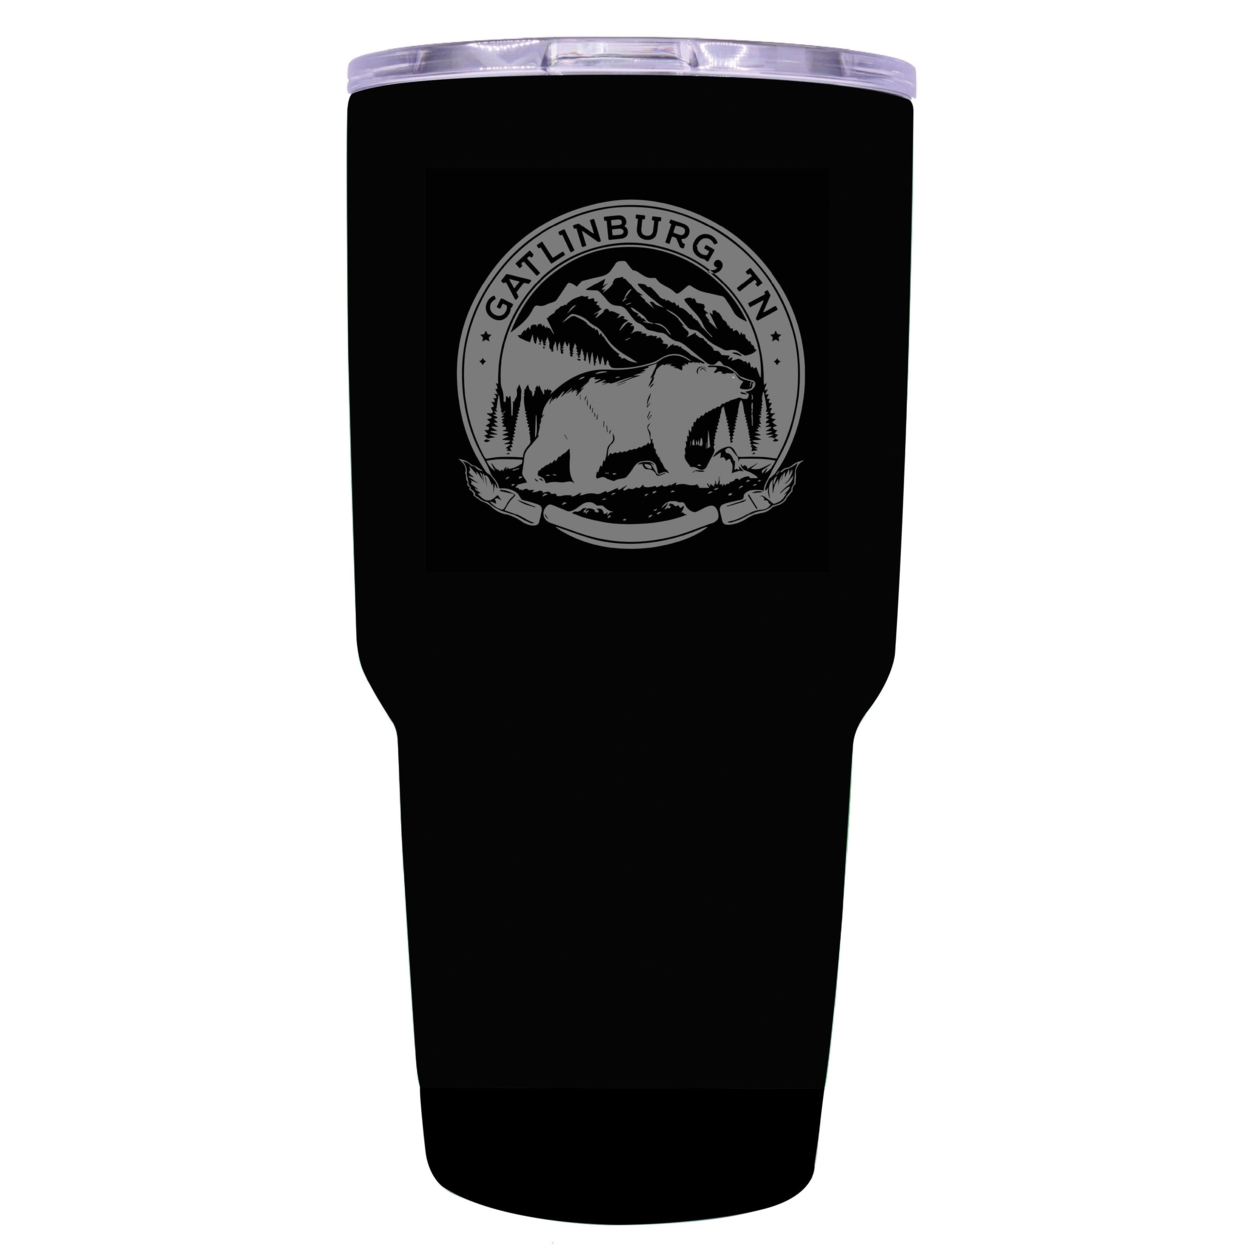 Gatlinburg Tennessee Laser Etched Souvenir 24 Oz Insulated Stainless Steel Tumbler - Black